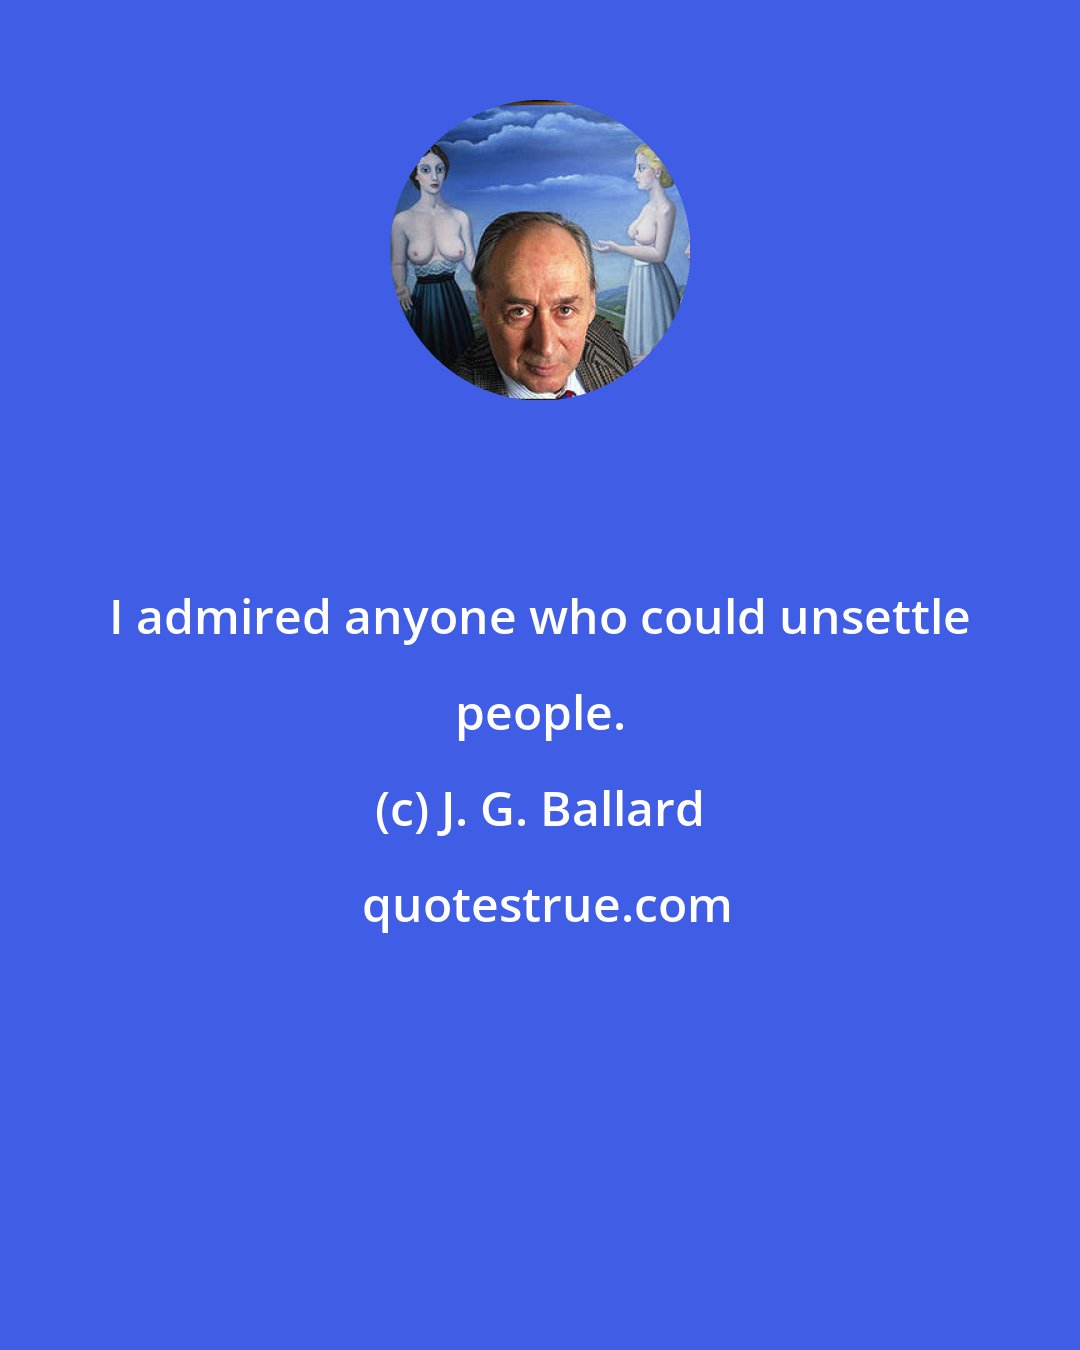 J. G. Ballard: I admired anyone who could unsettle people.